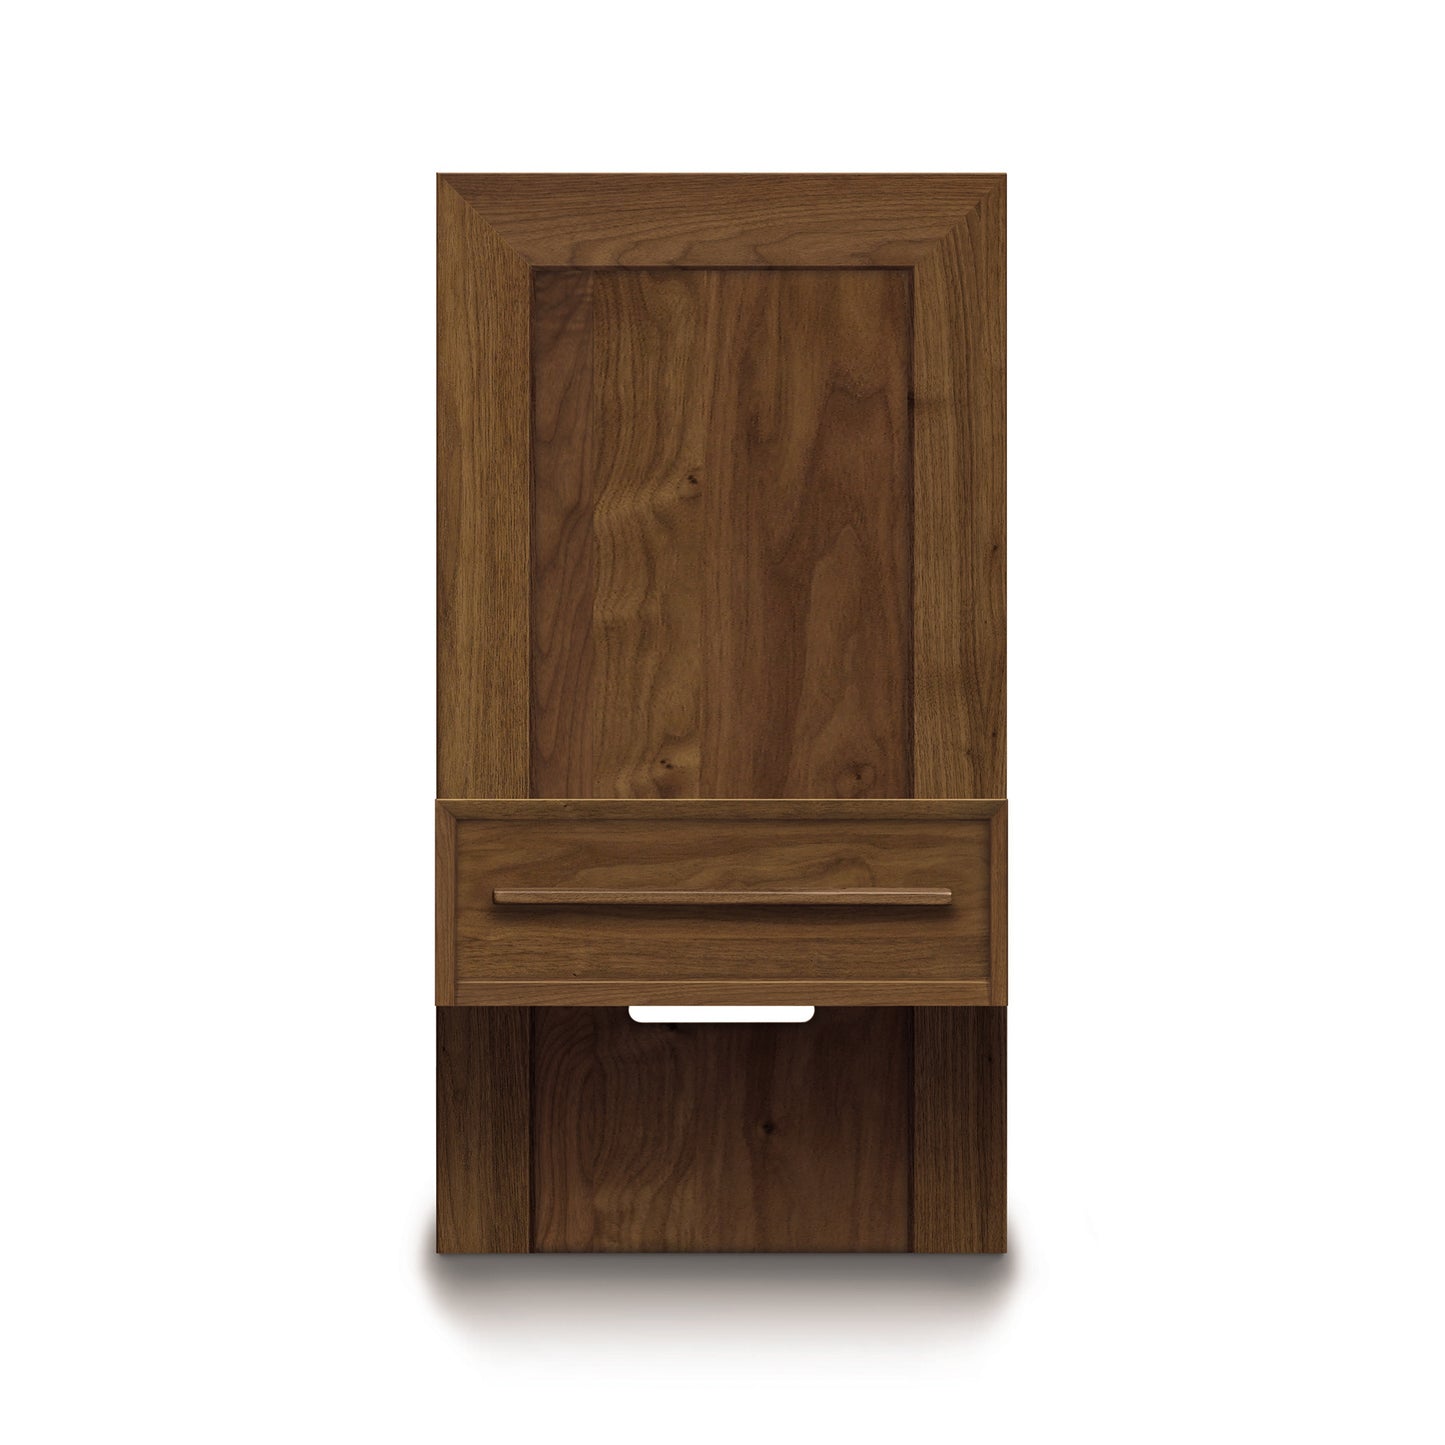 Wooden cabinet with one drawer and a closed door from the Copeland Furniture Moduluxe Attached Nightstand with Drawer - 35" Series, isolated on a white background.